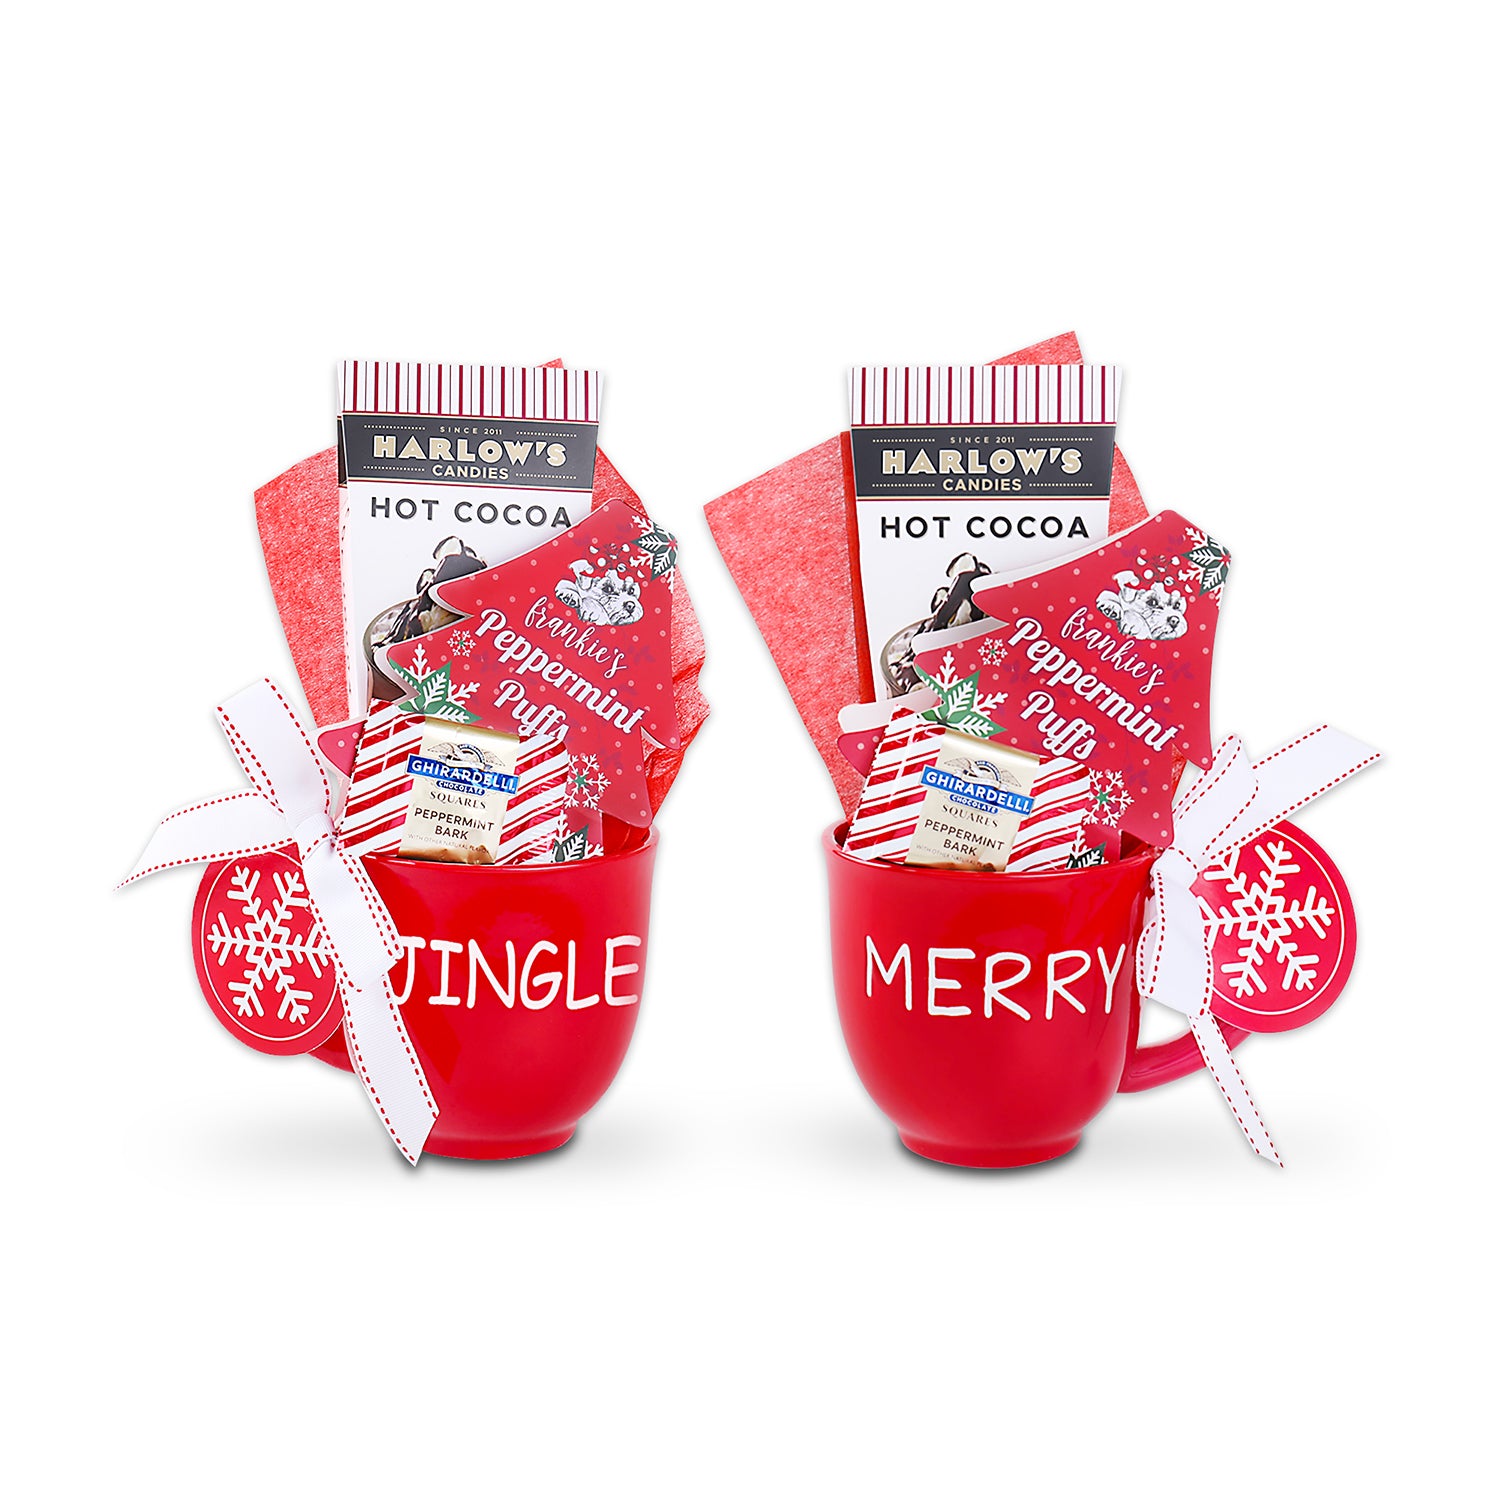 2 “Jingle Bells” Red Latte Mugs, 2 “Merry” Red Latte Mugs, Harlow’s Hot Cocoa Drink Mix (4pcs.), 4 Frankie’s Peppermint Puffs (0.9oz.), Ghirardelli Peppermint Bark Tasting Squares (4pcs.) (image shows 2 mugs)